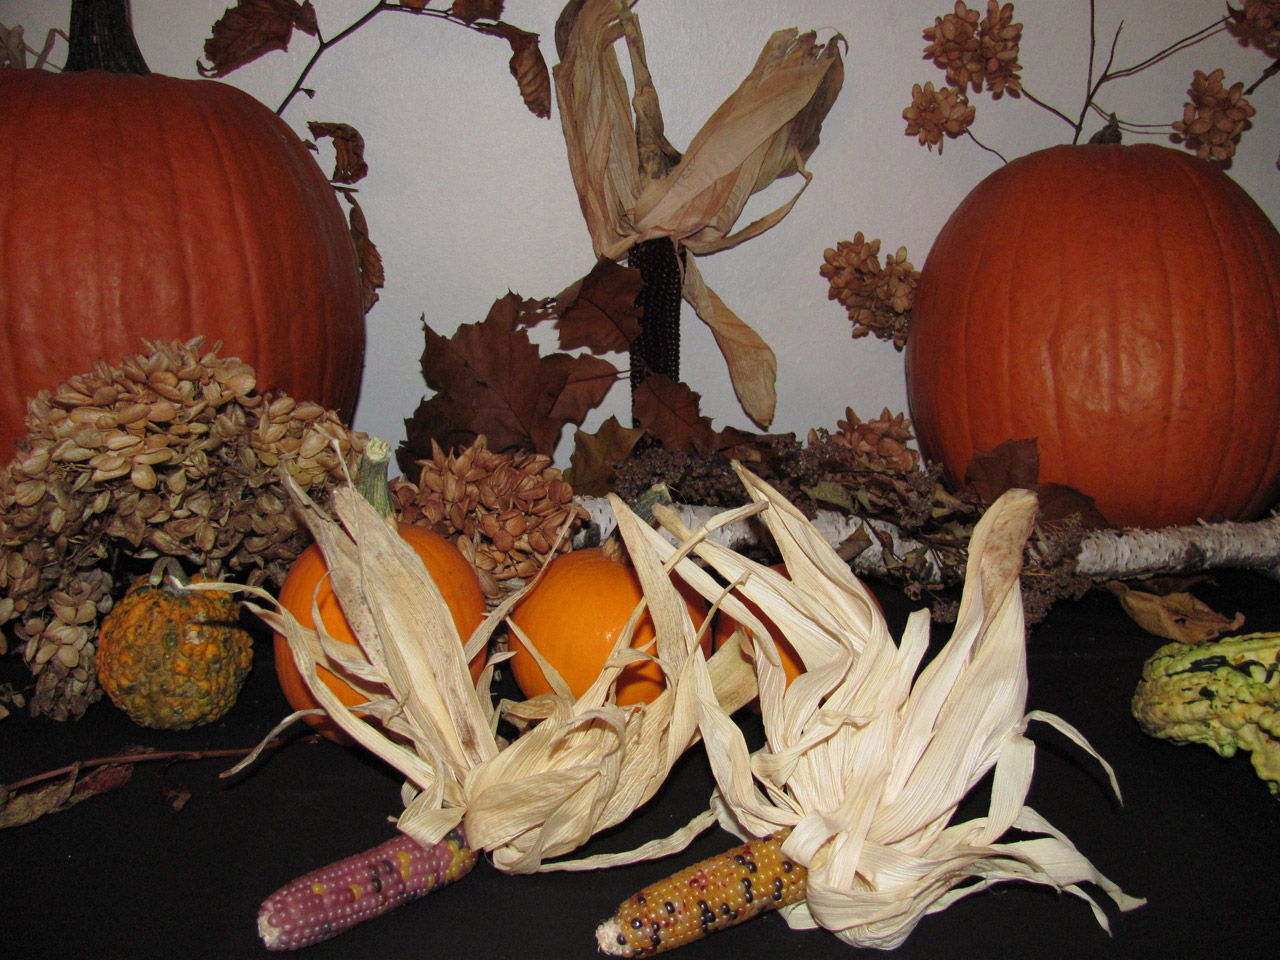 Fall arrangement with pumpkins and indian corn